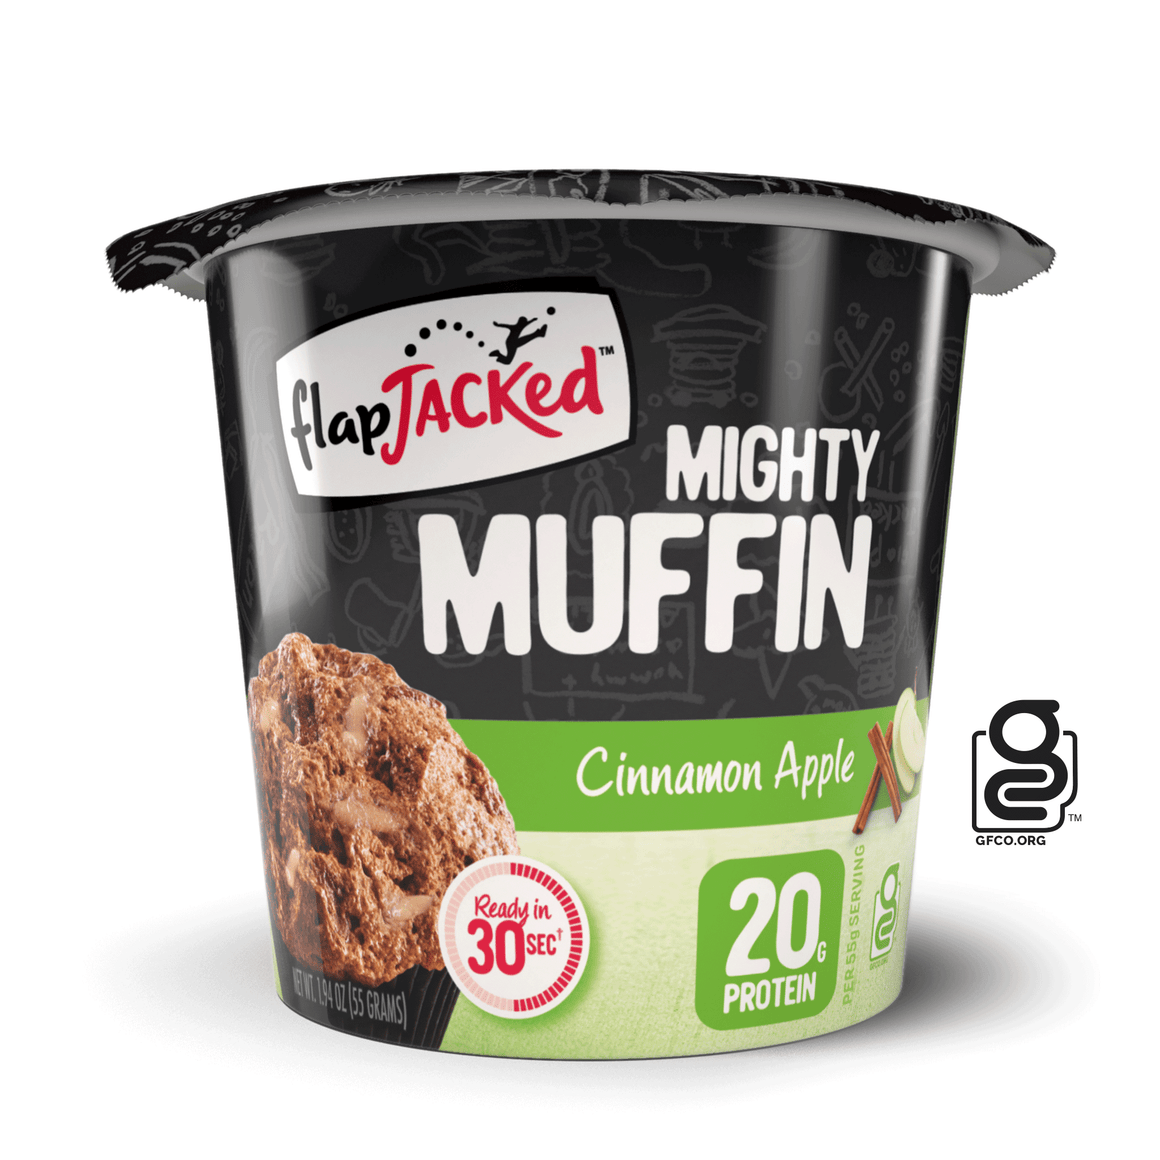 Cinnamon Apple Mighty Muffin - 12 Pack